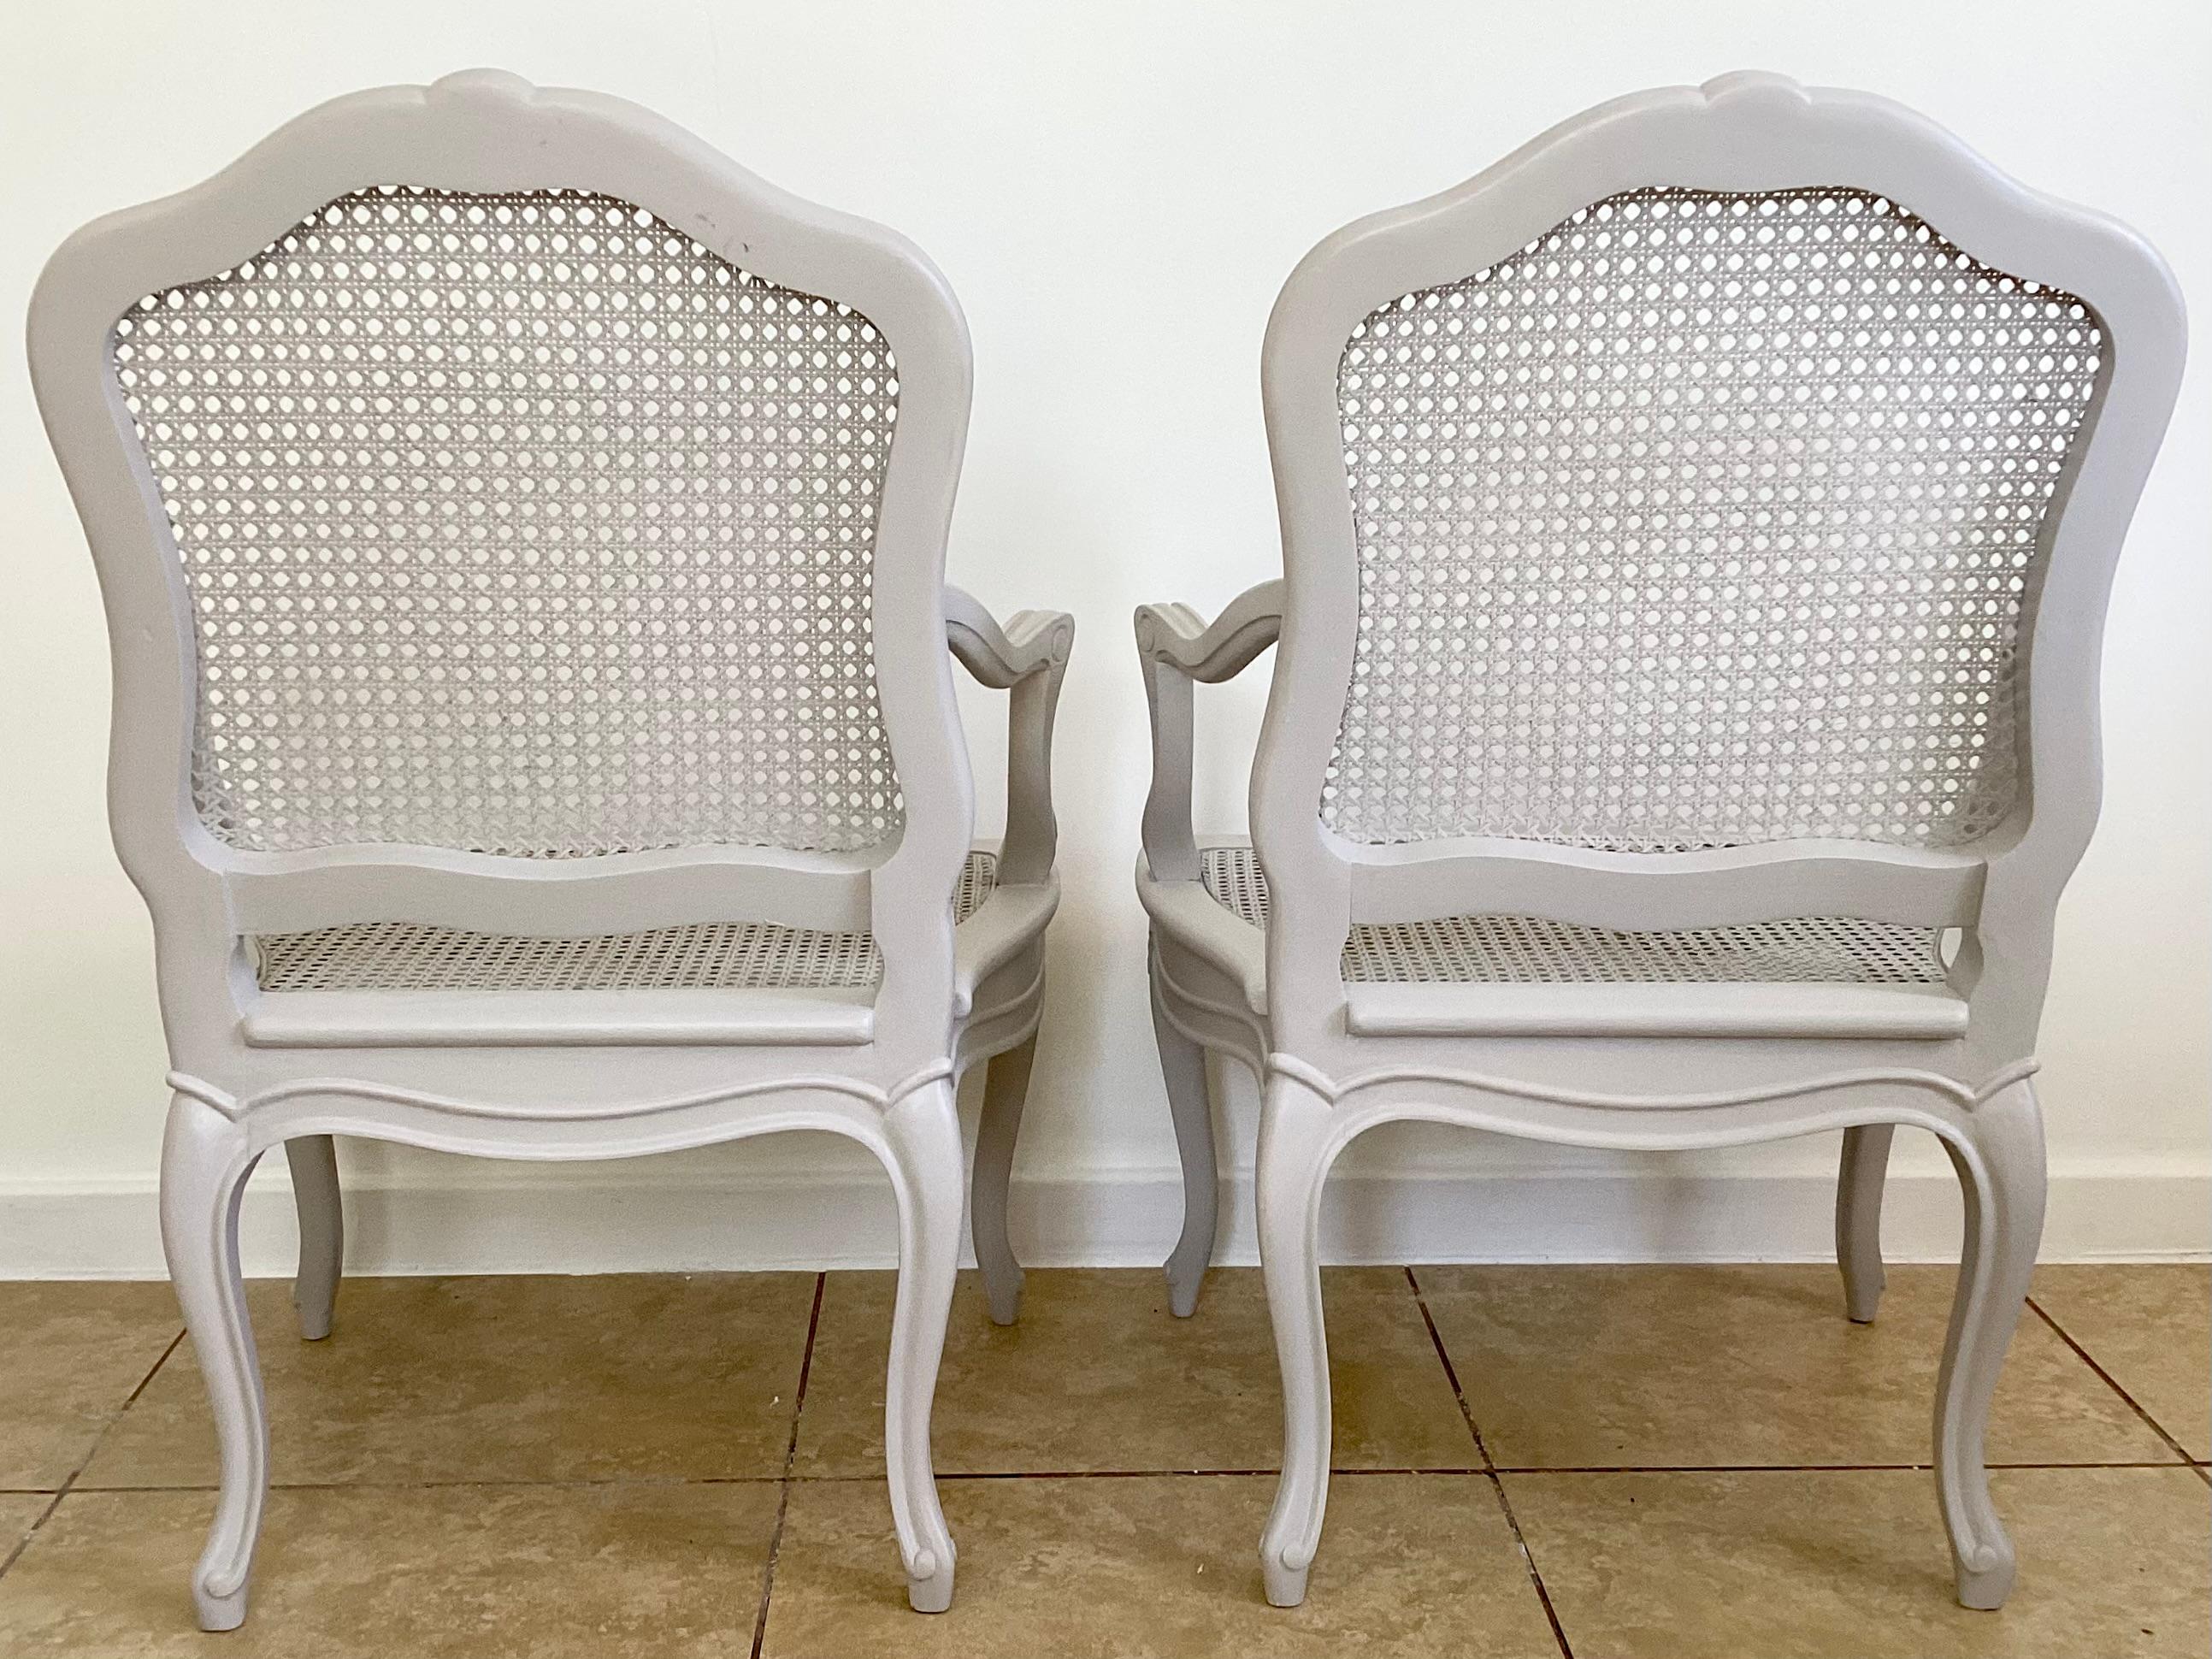 Caning Mid-19th Century French Louis XV Fauteuil Guggenheim Collection, a Pair For Sale